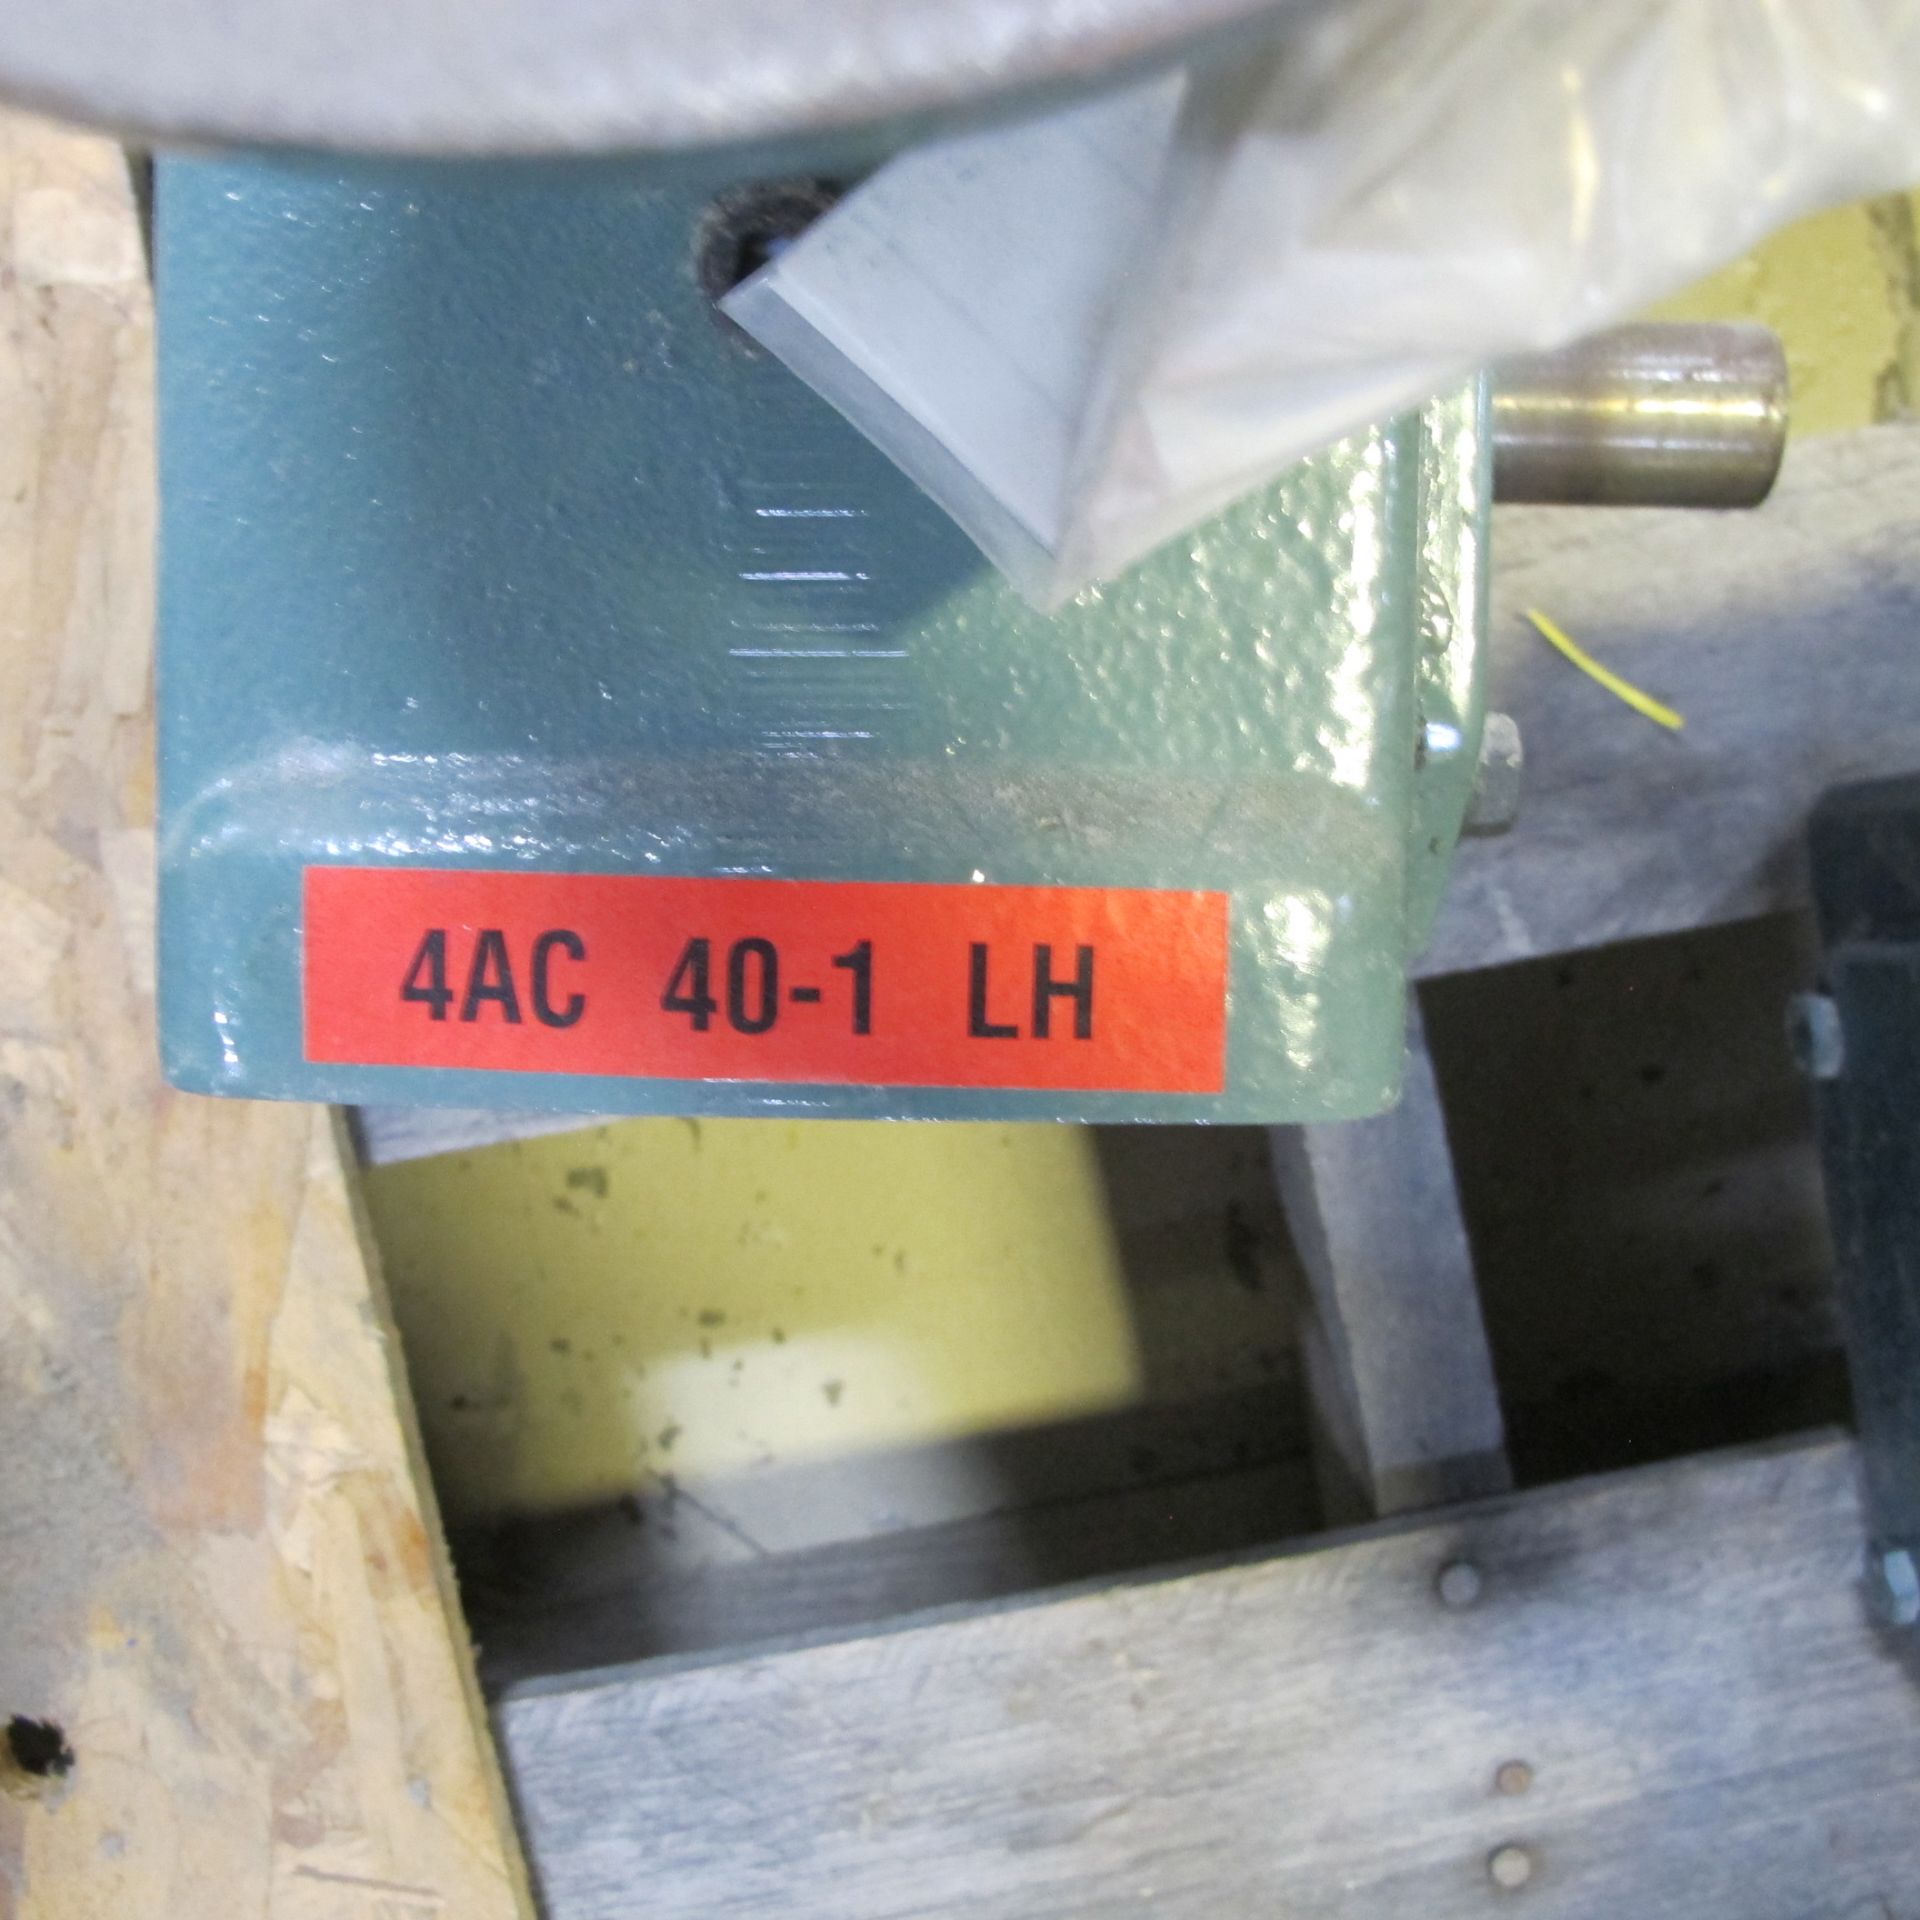 LOT OF (4) GEARBOXES IN ROW, GROVE HEAR BM011-2, RATIO 2:1, WEPCO 4ACLH, RATIO 40:1, (2) GROVE - Image 5 of 10